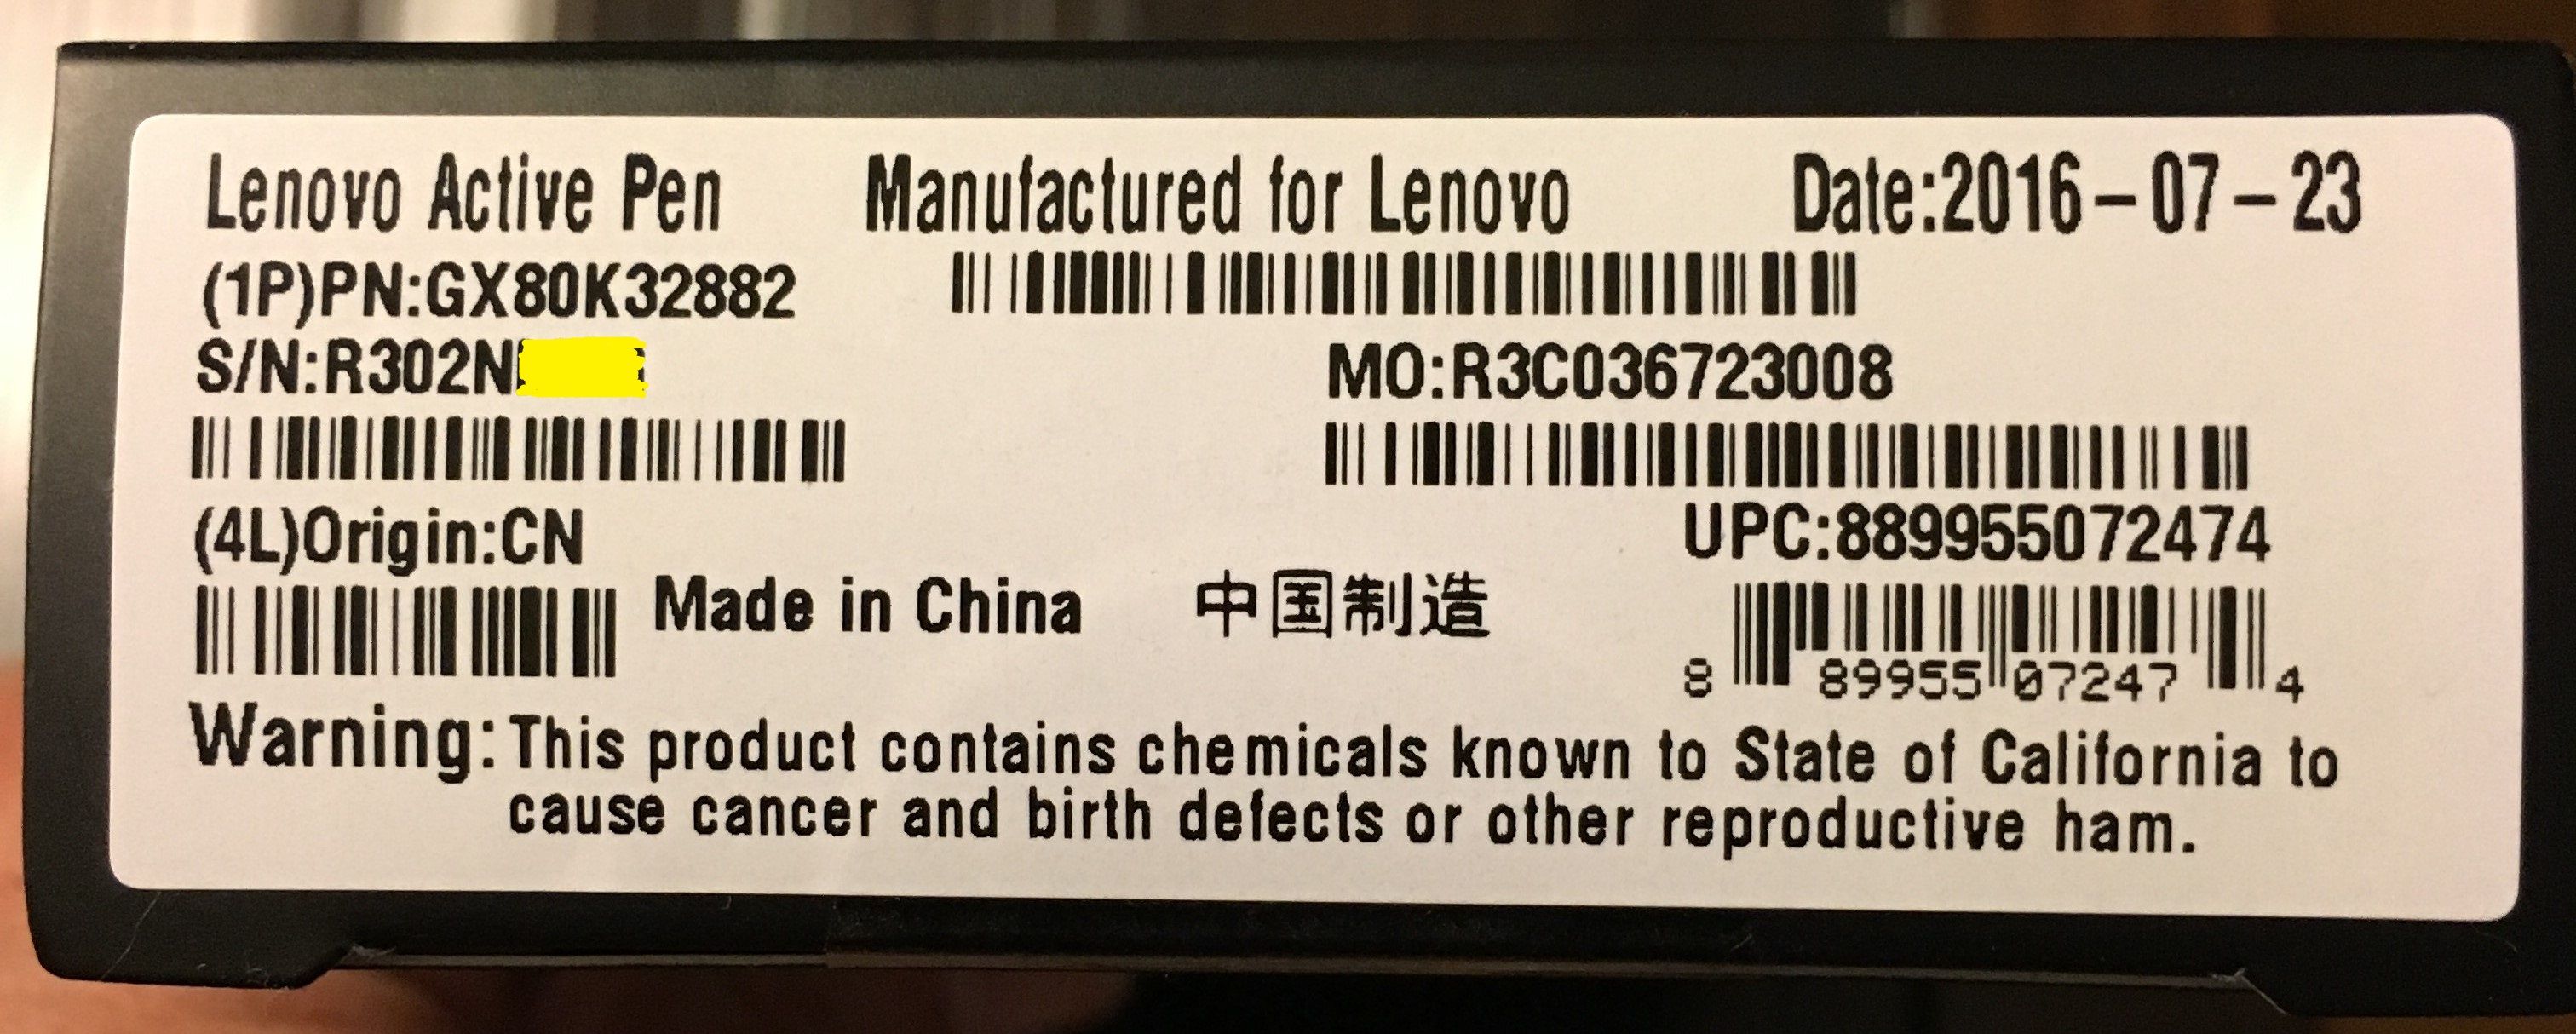 How to Check Lenovo Laptop Charger Serial Number: A Comprehensive Guide